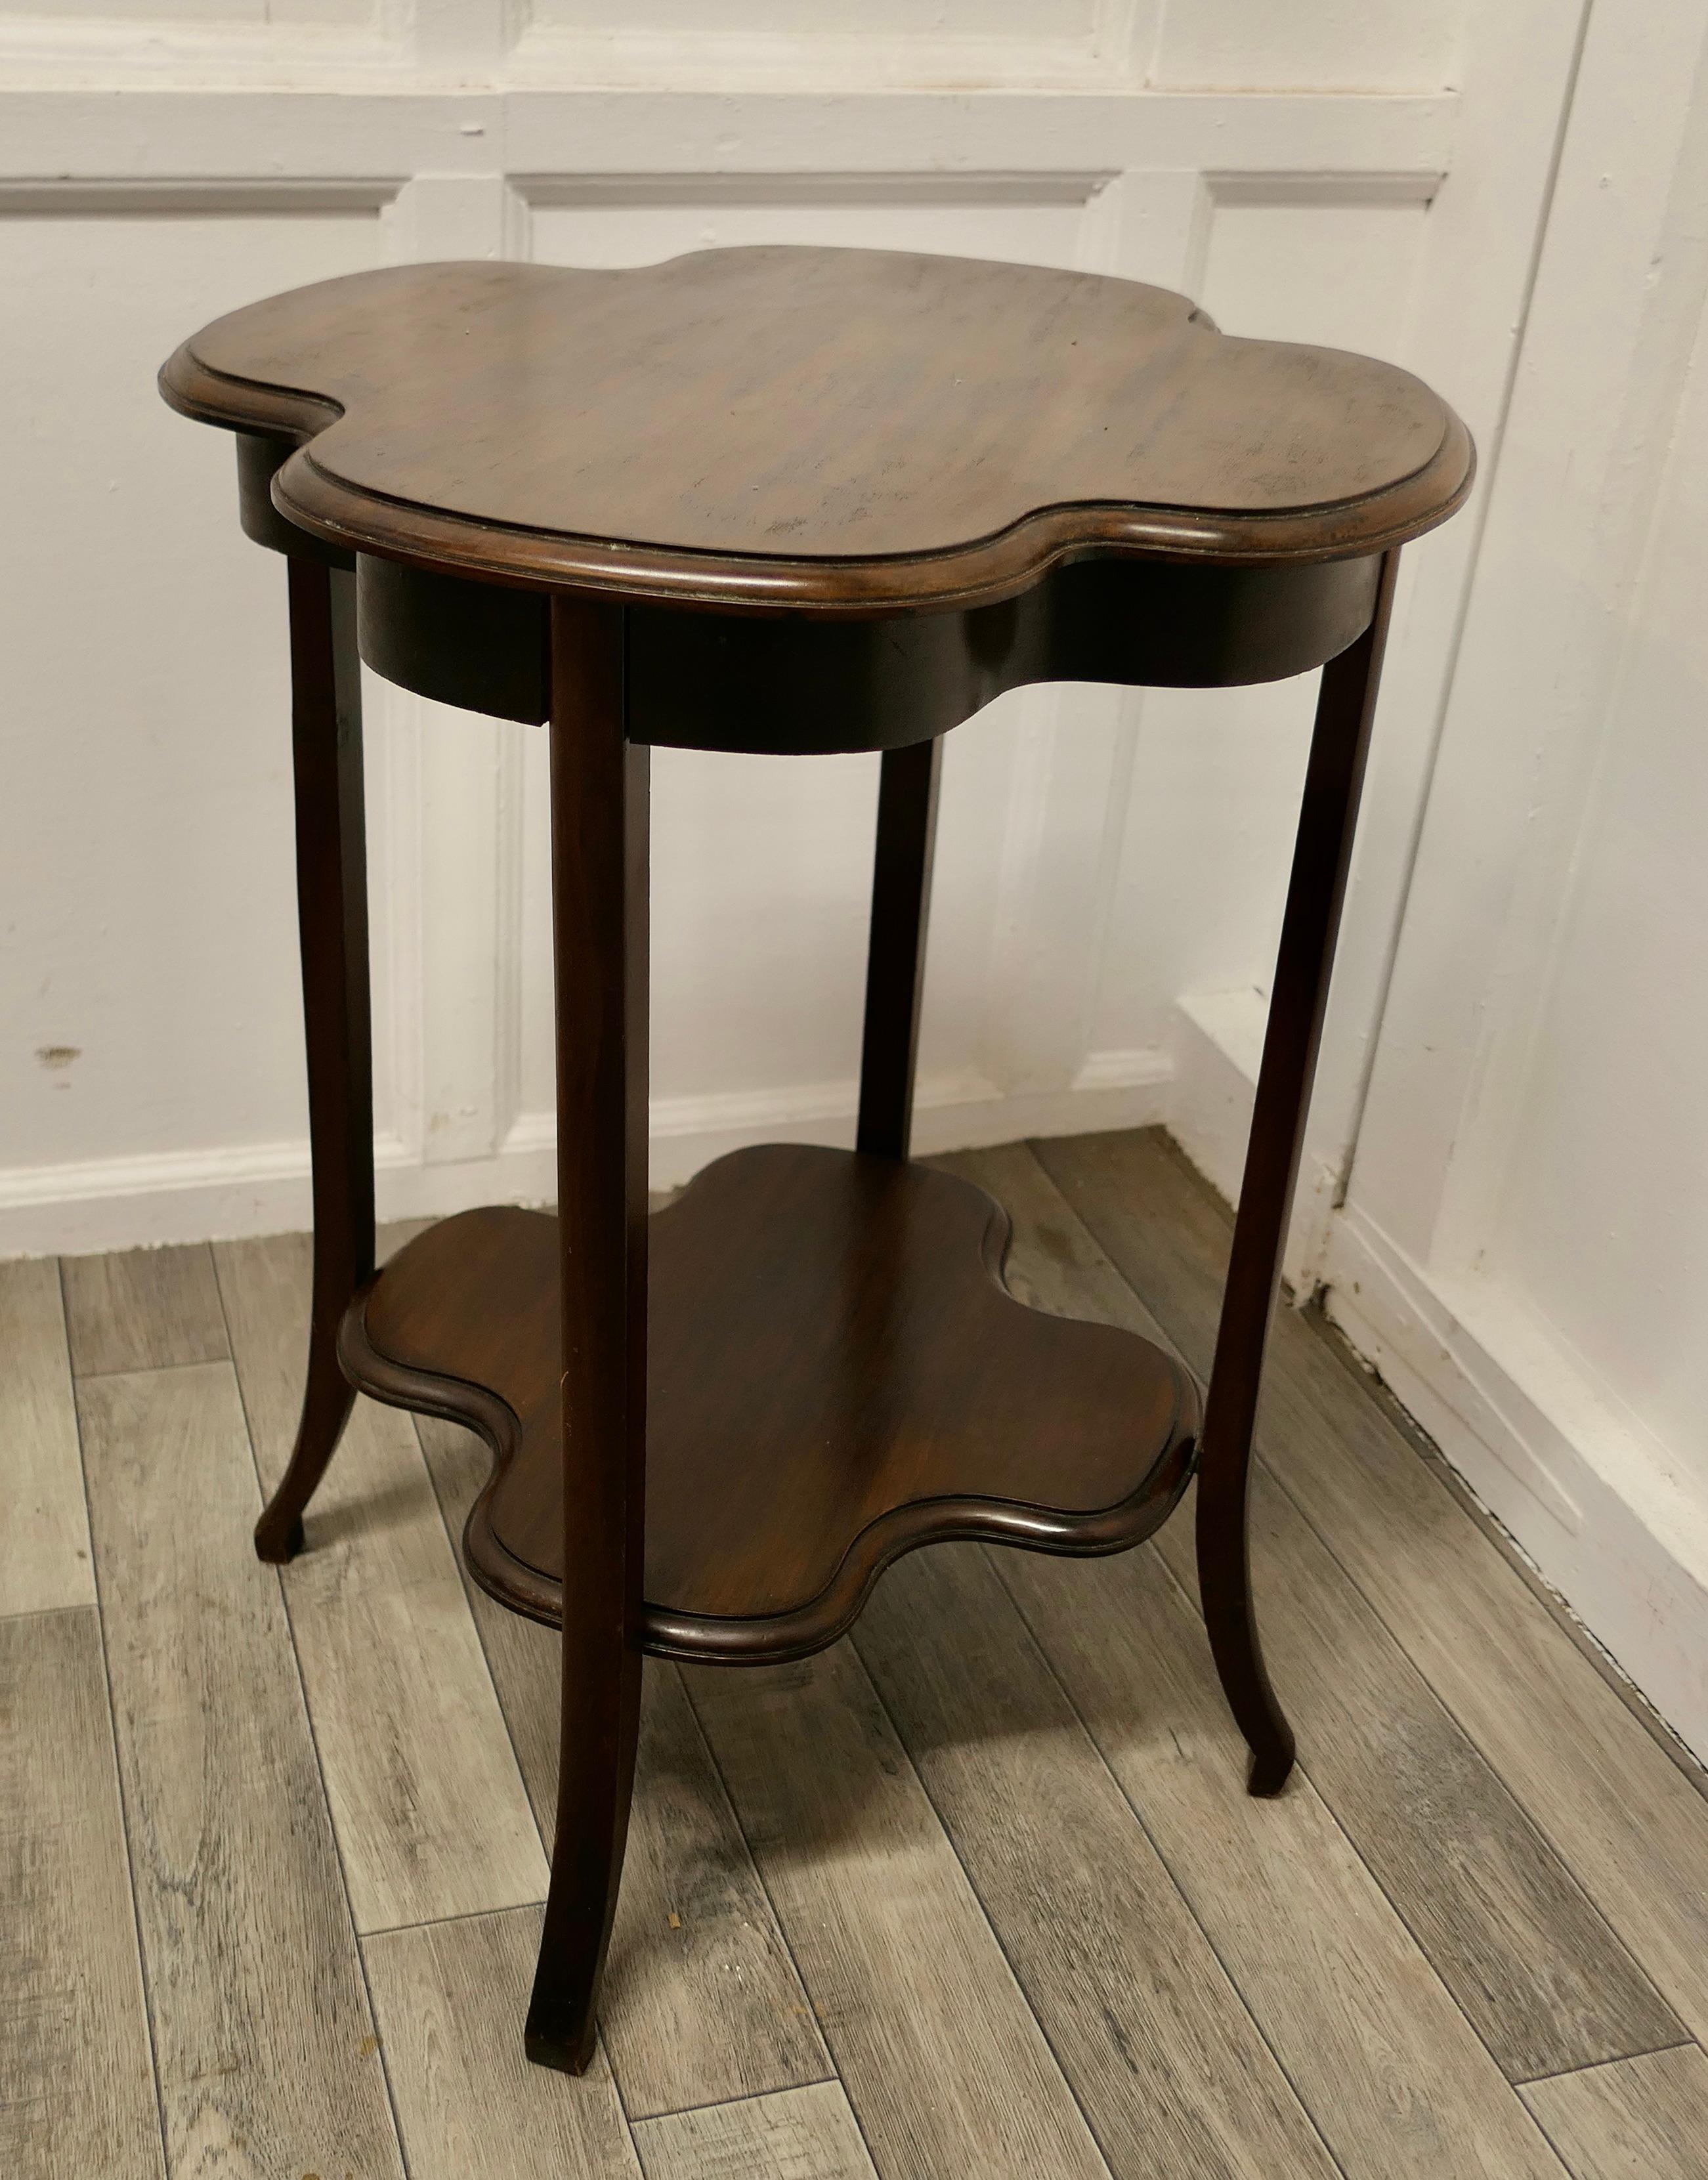 Irish Walnut side or lamp table.

The table has a four leaf clover shaped table top and the same shape undertier, it has slightly outward splayed legs.
The table is in very good condition and would work well as a side or lamp table as well as an